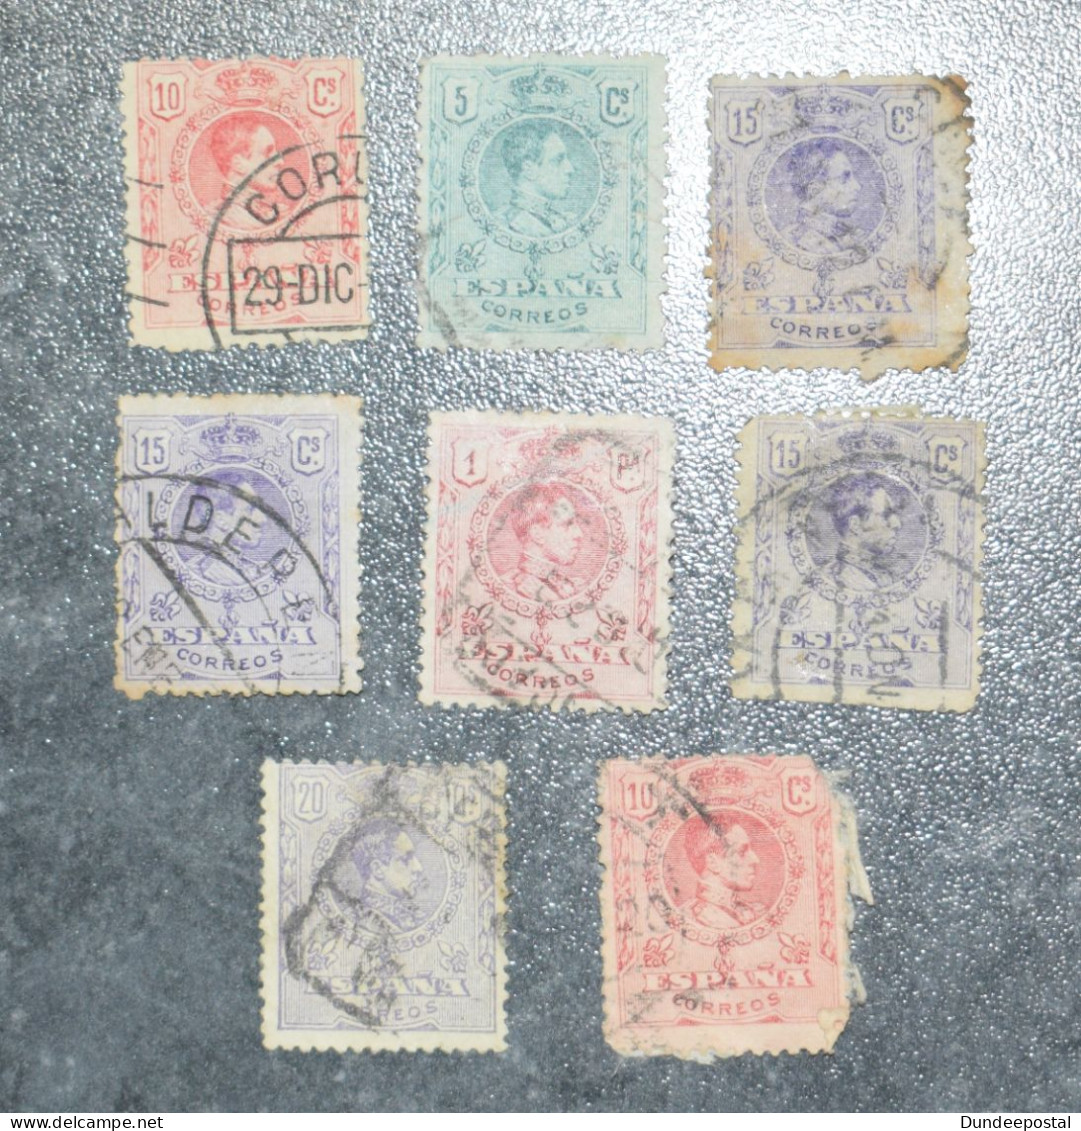 SPAIN  STAMPS  Alfonso Control Numbers  1909  ~~L@@K~~ - Gebraucht